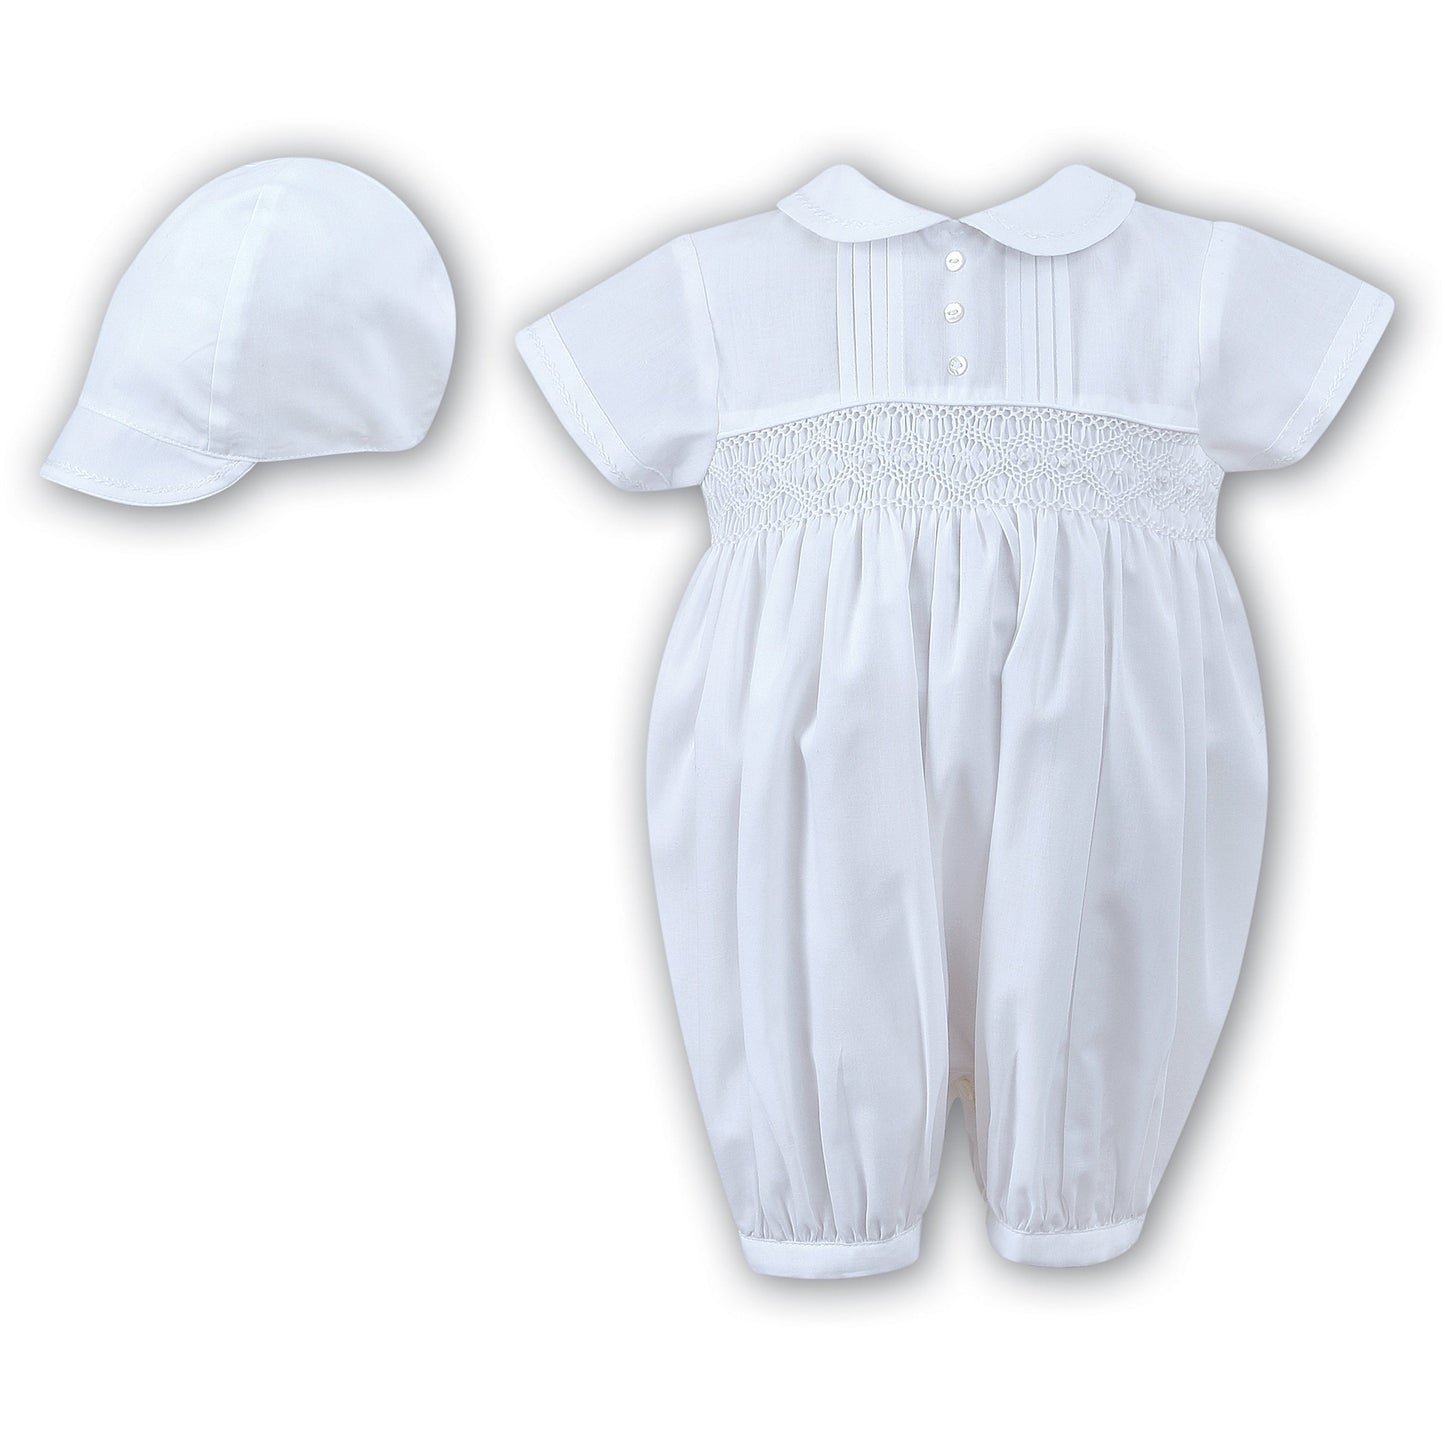 White Short Sleeve Romper and Hat